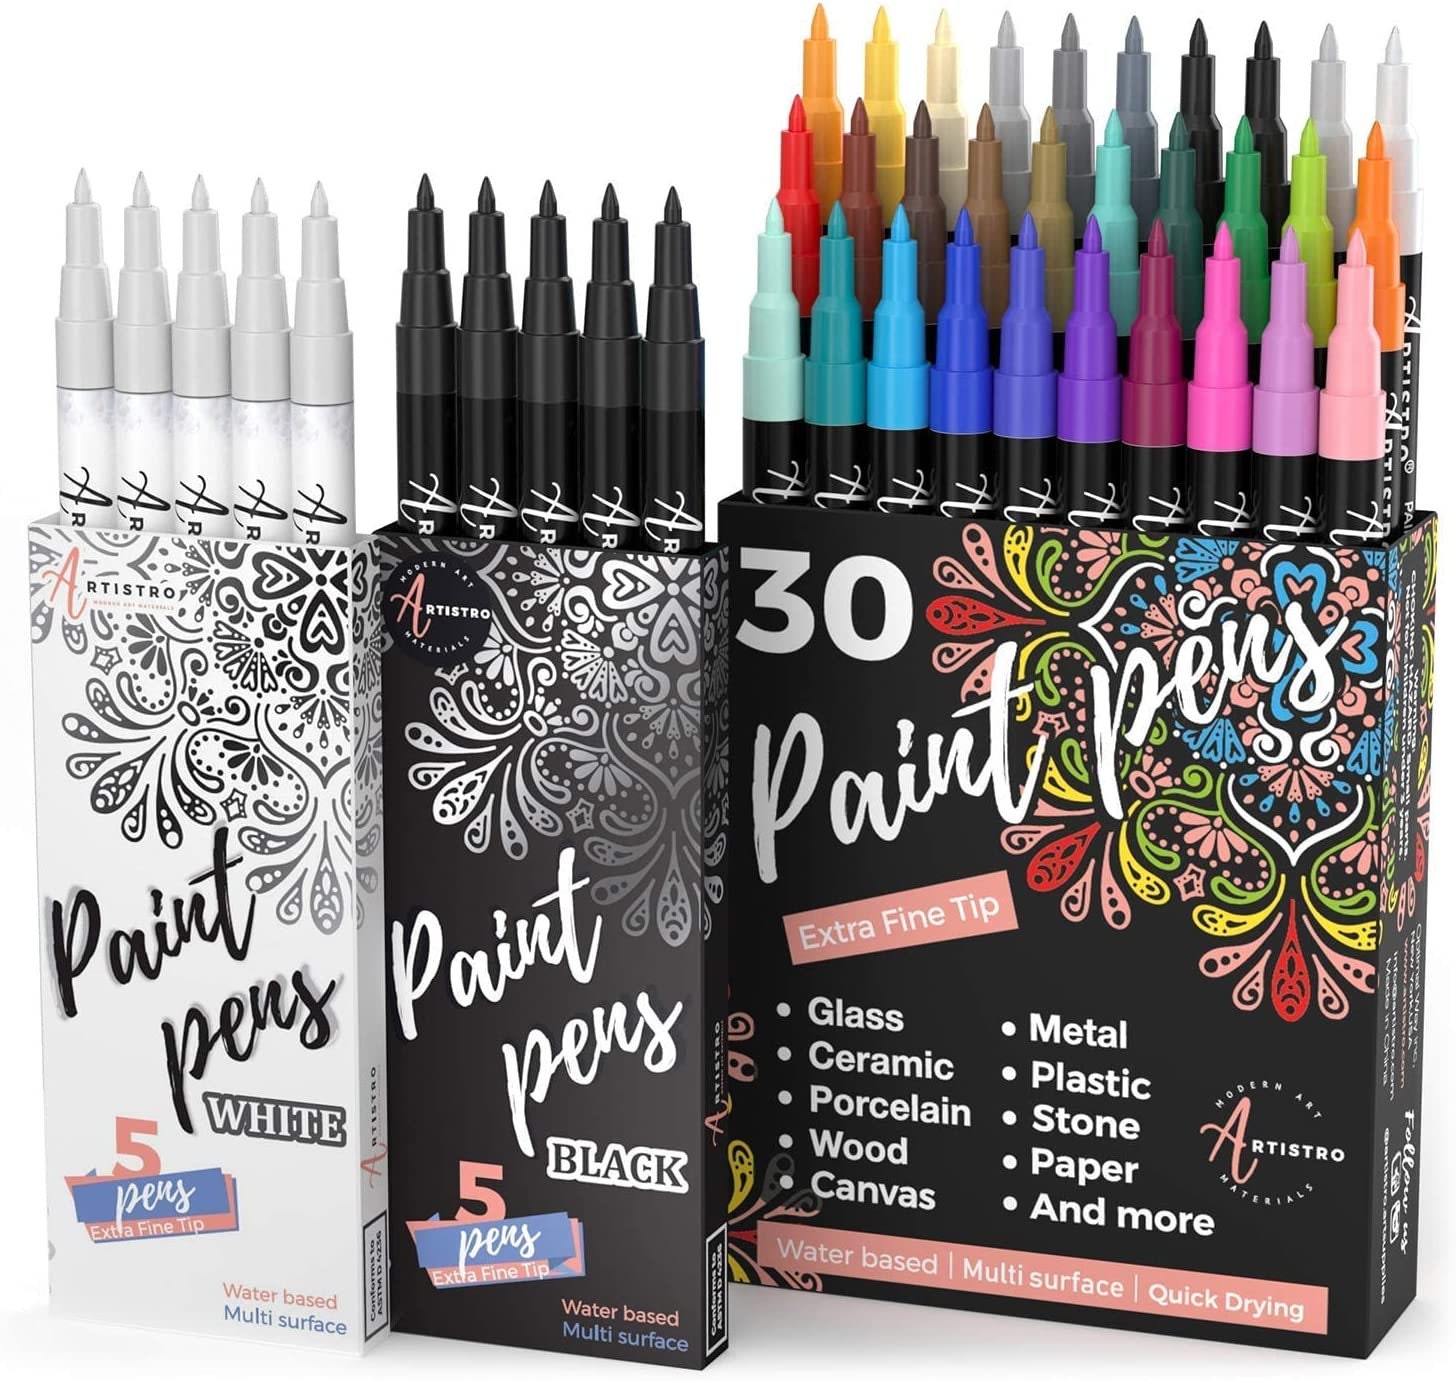 Acrylic Paint Pens Markers, 24 Colors Dual Tip Acrylic Paint Pens for Rock  Painting, Wood, Canvas, Stone, Glass, Ceramic Surfaces, DIY Crafts Making